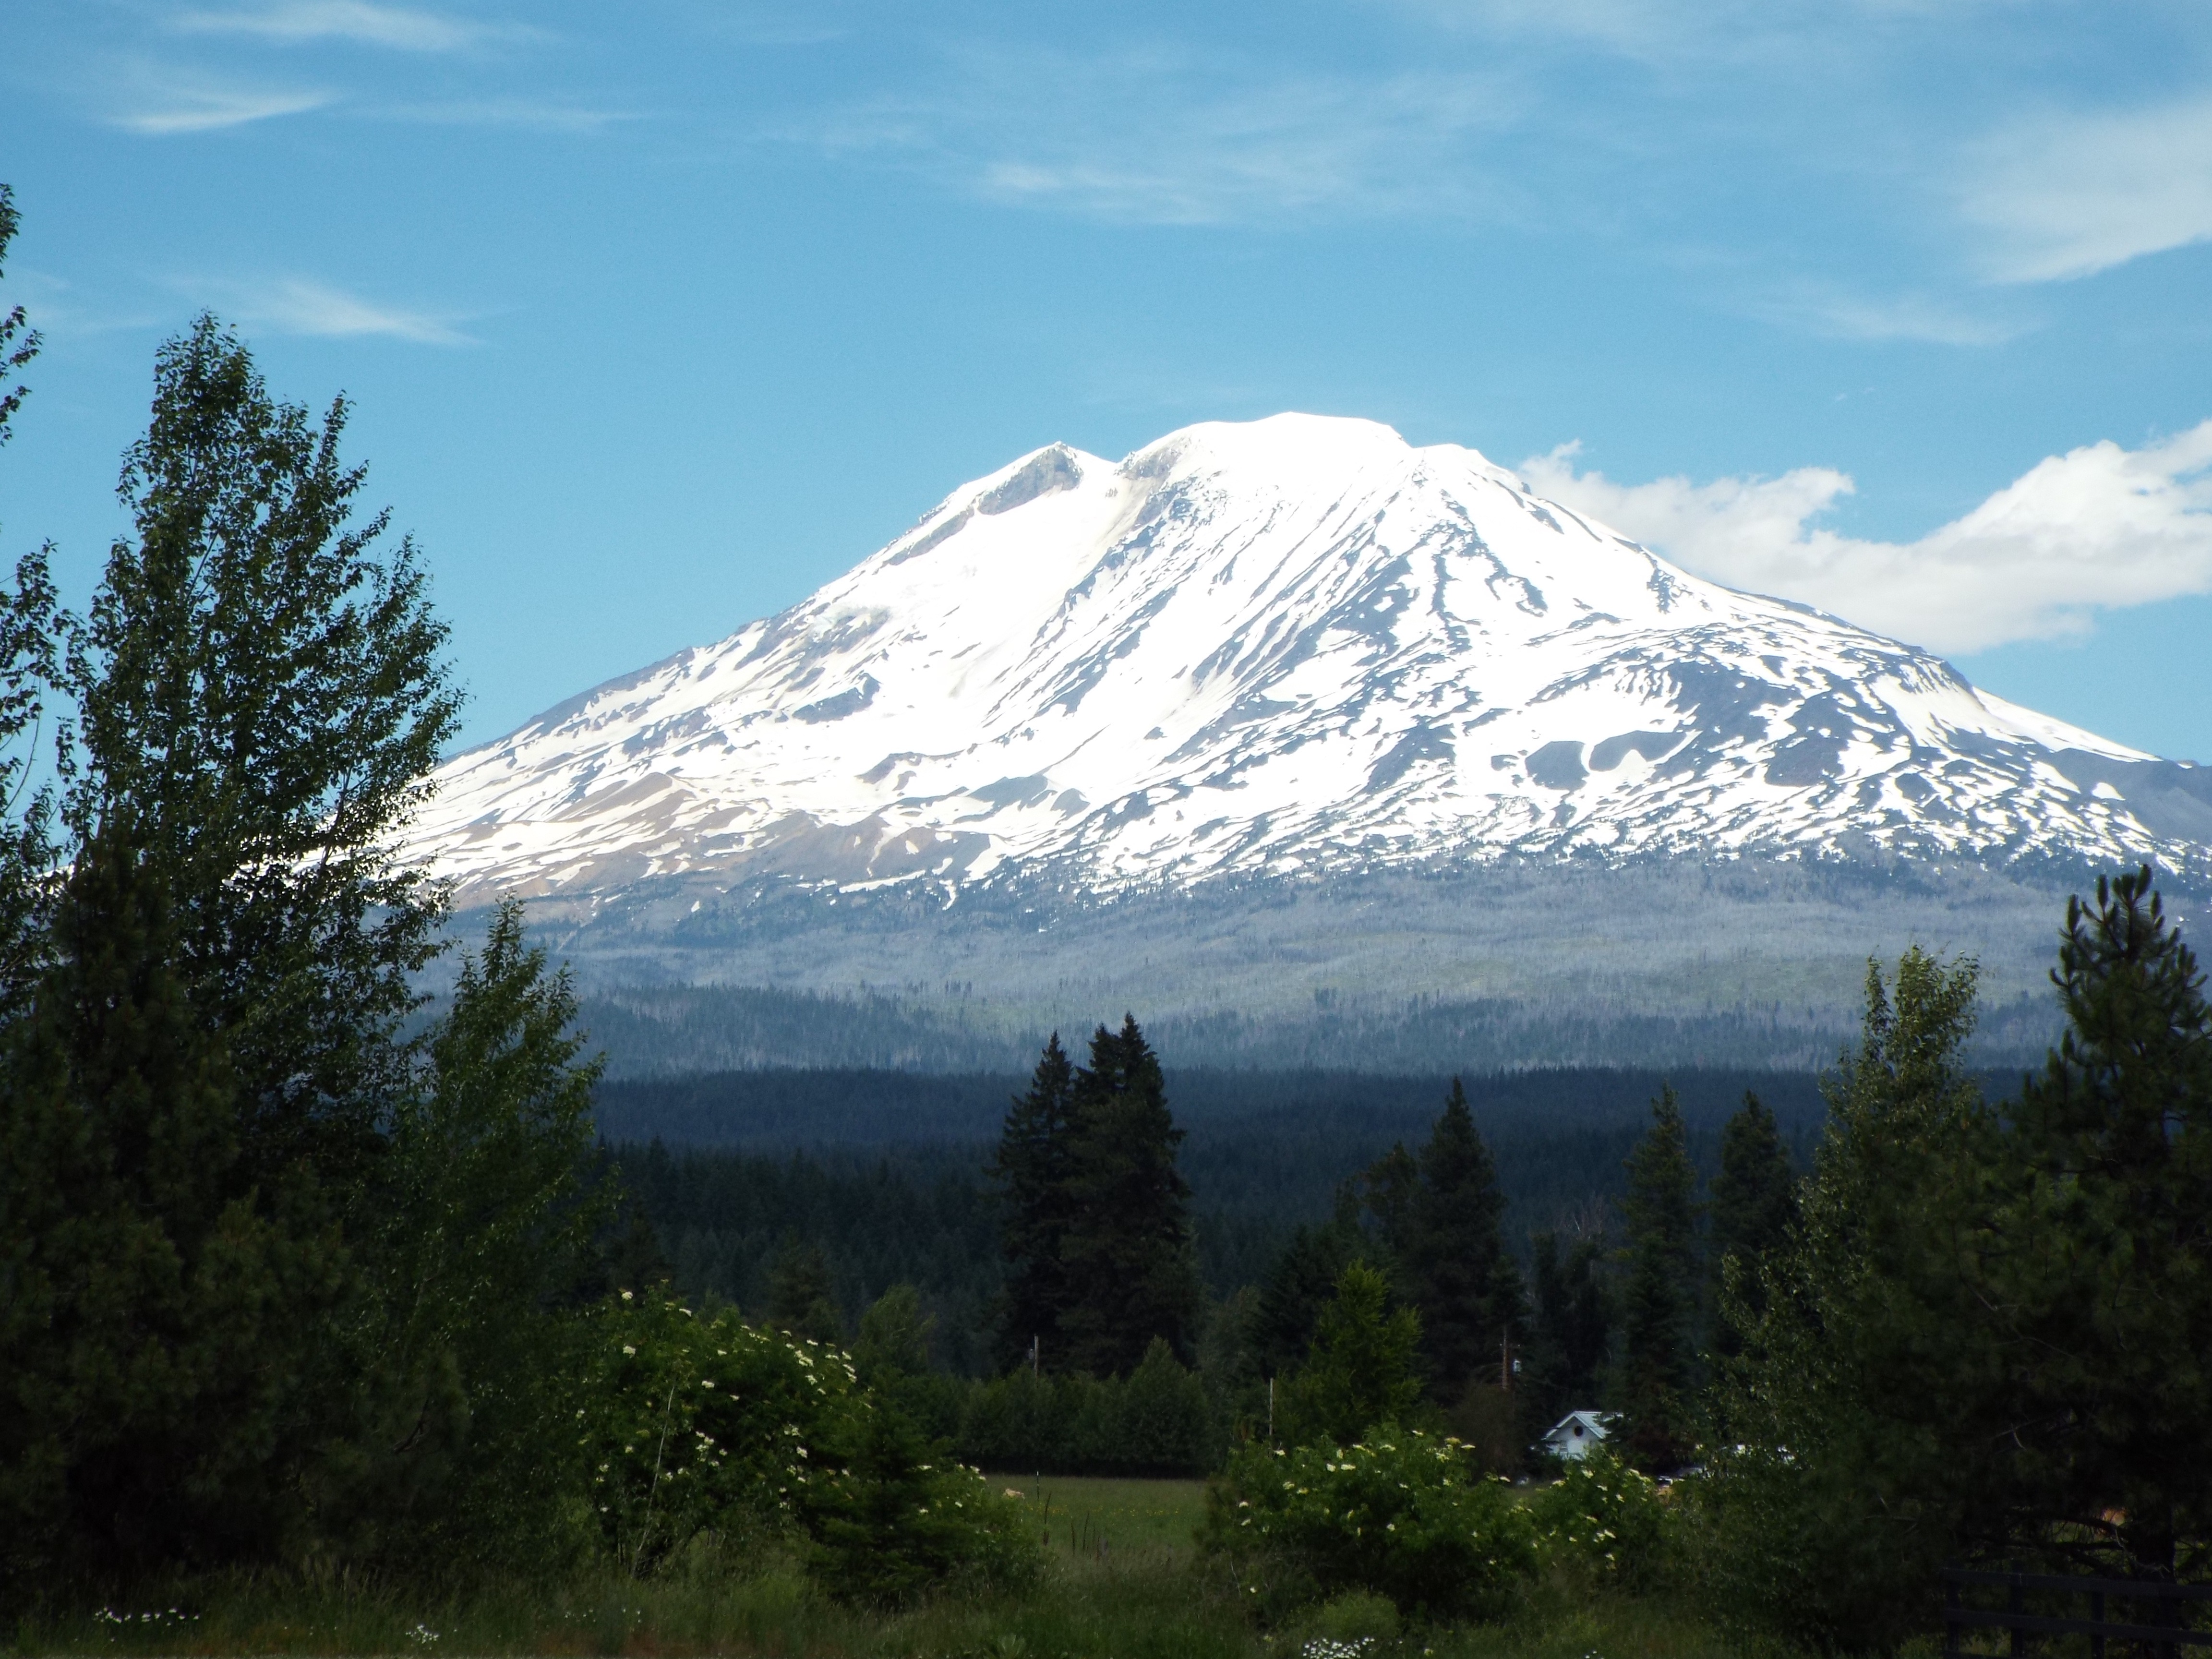 Mount Adams as seen from the Trout Lake Washington valley in June